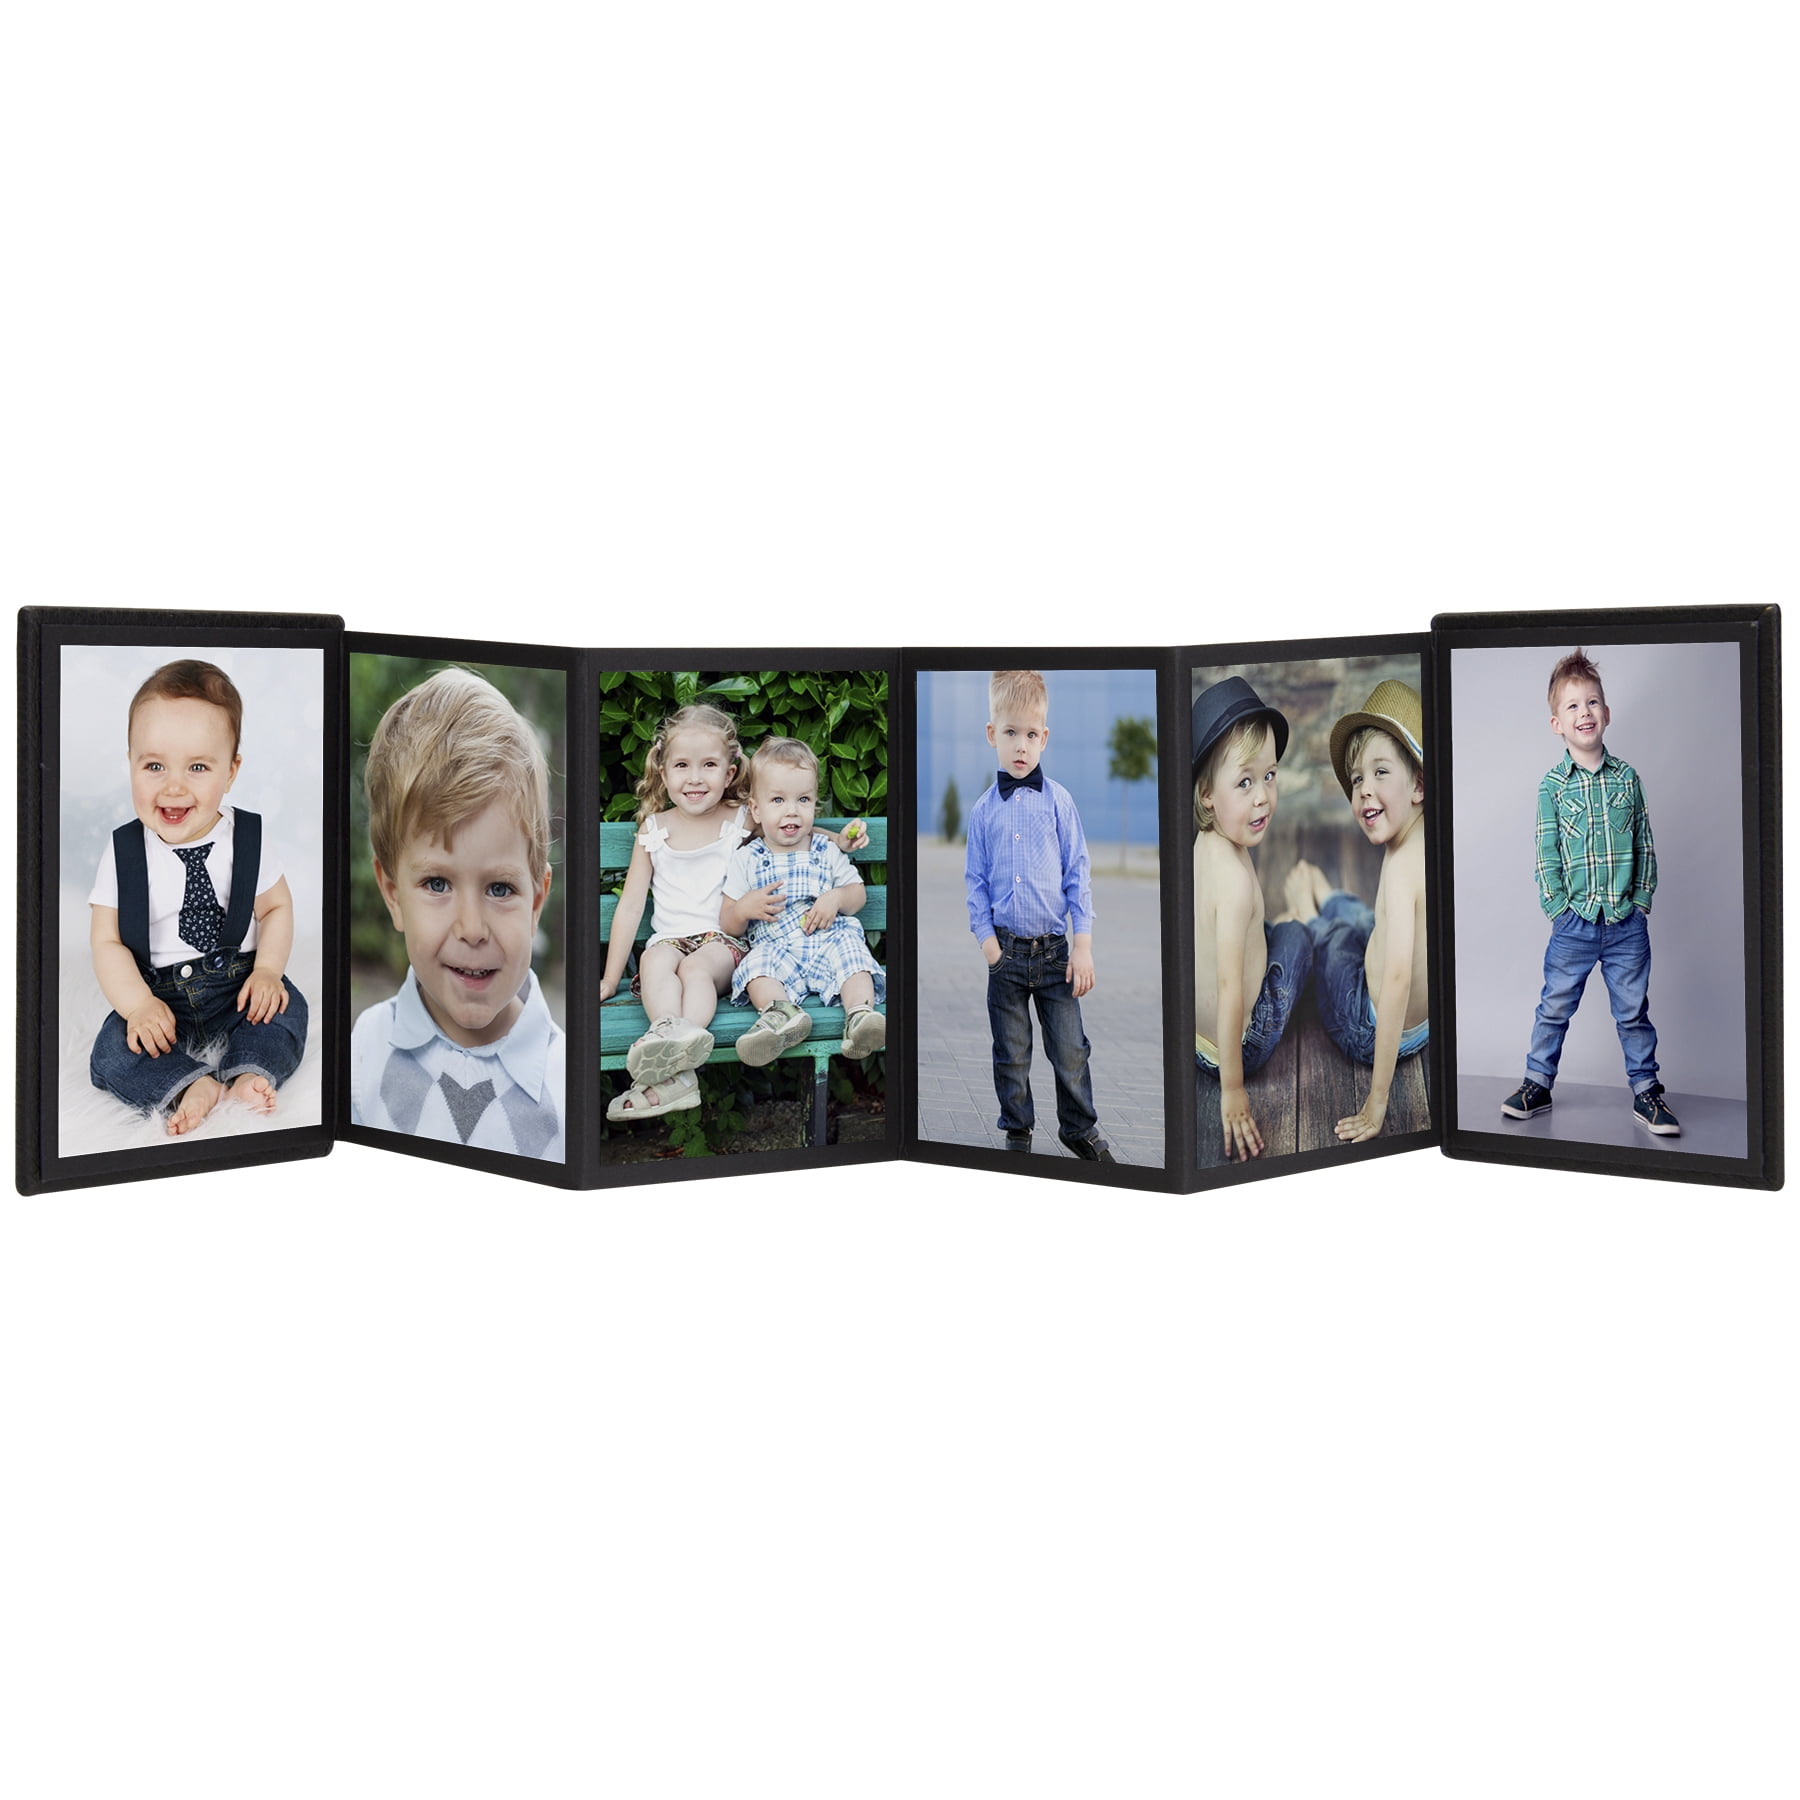 EASYGIFT MINIALBUM for photo sizes 4x6inch (10x15cm) in blue or black